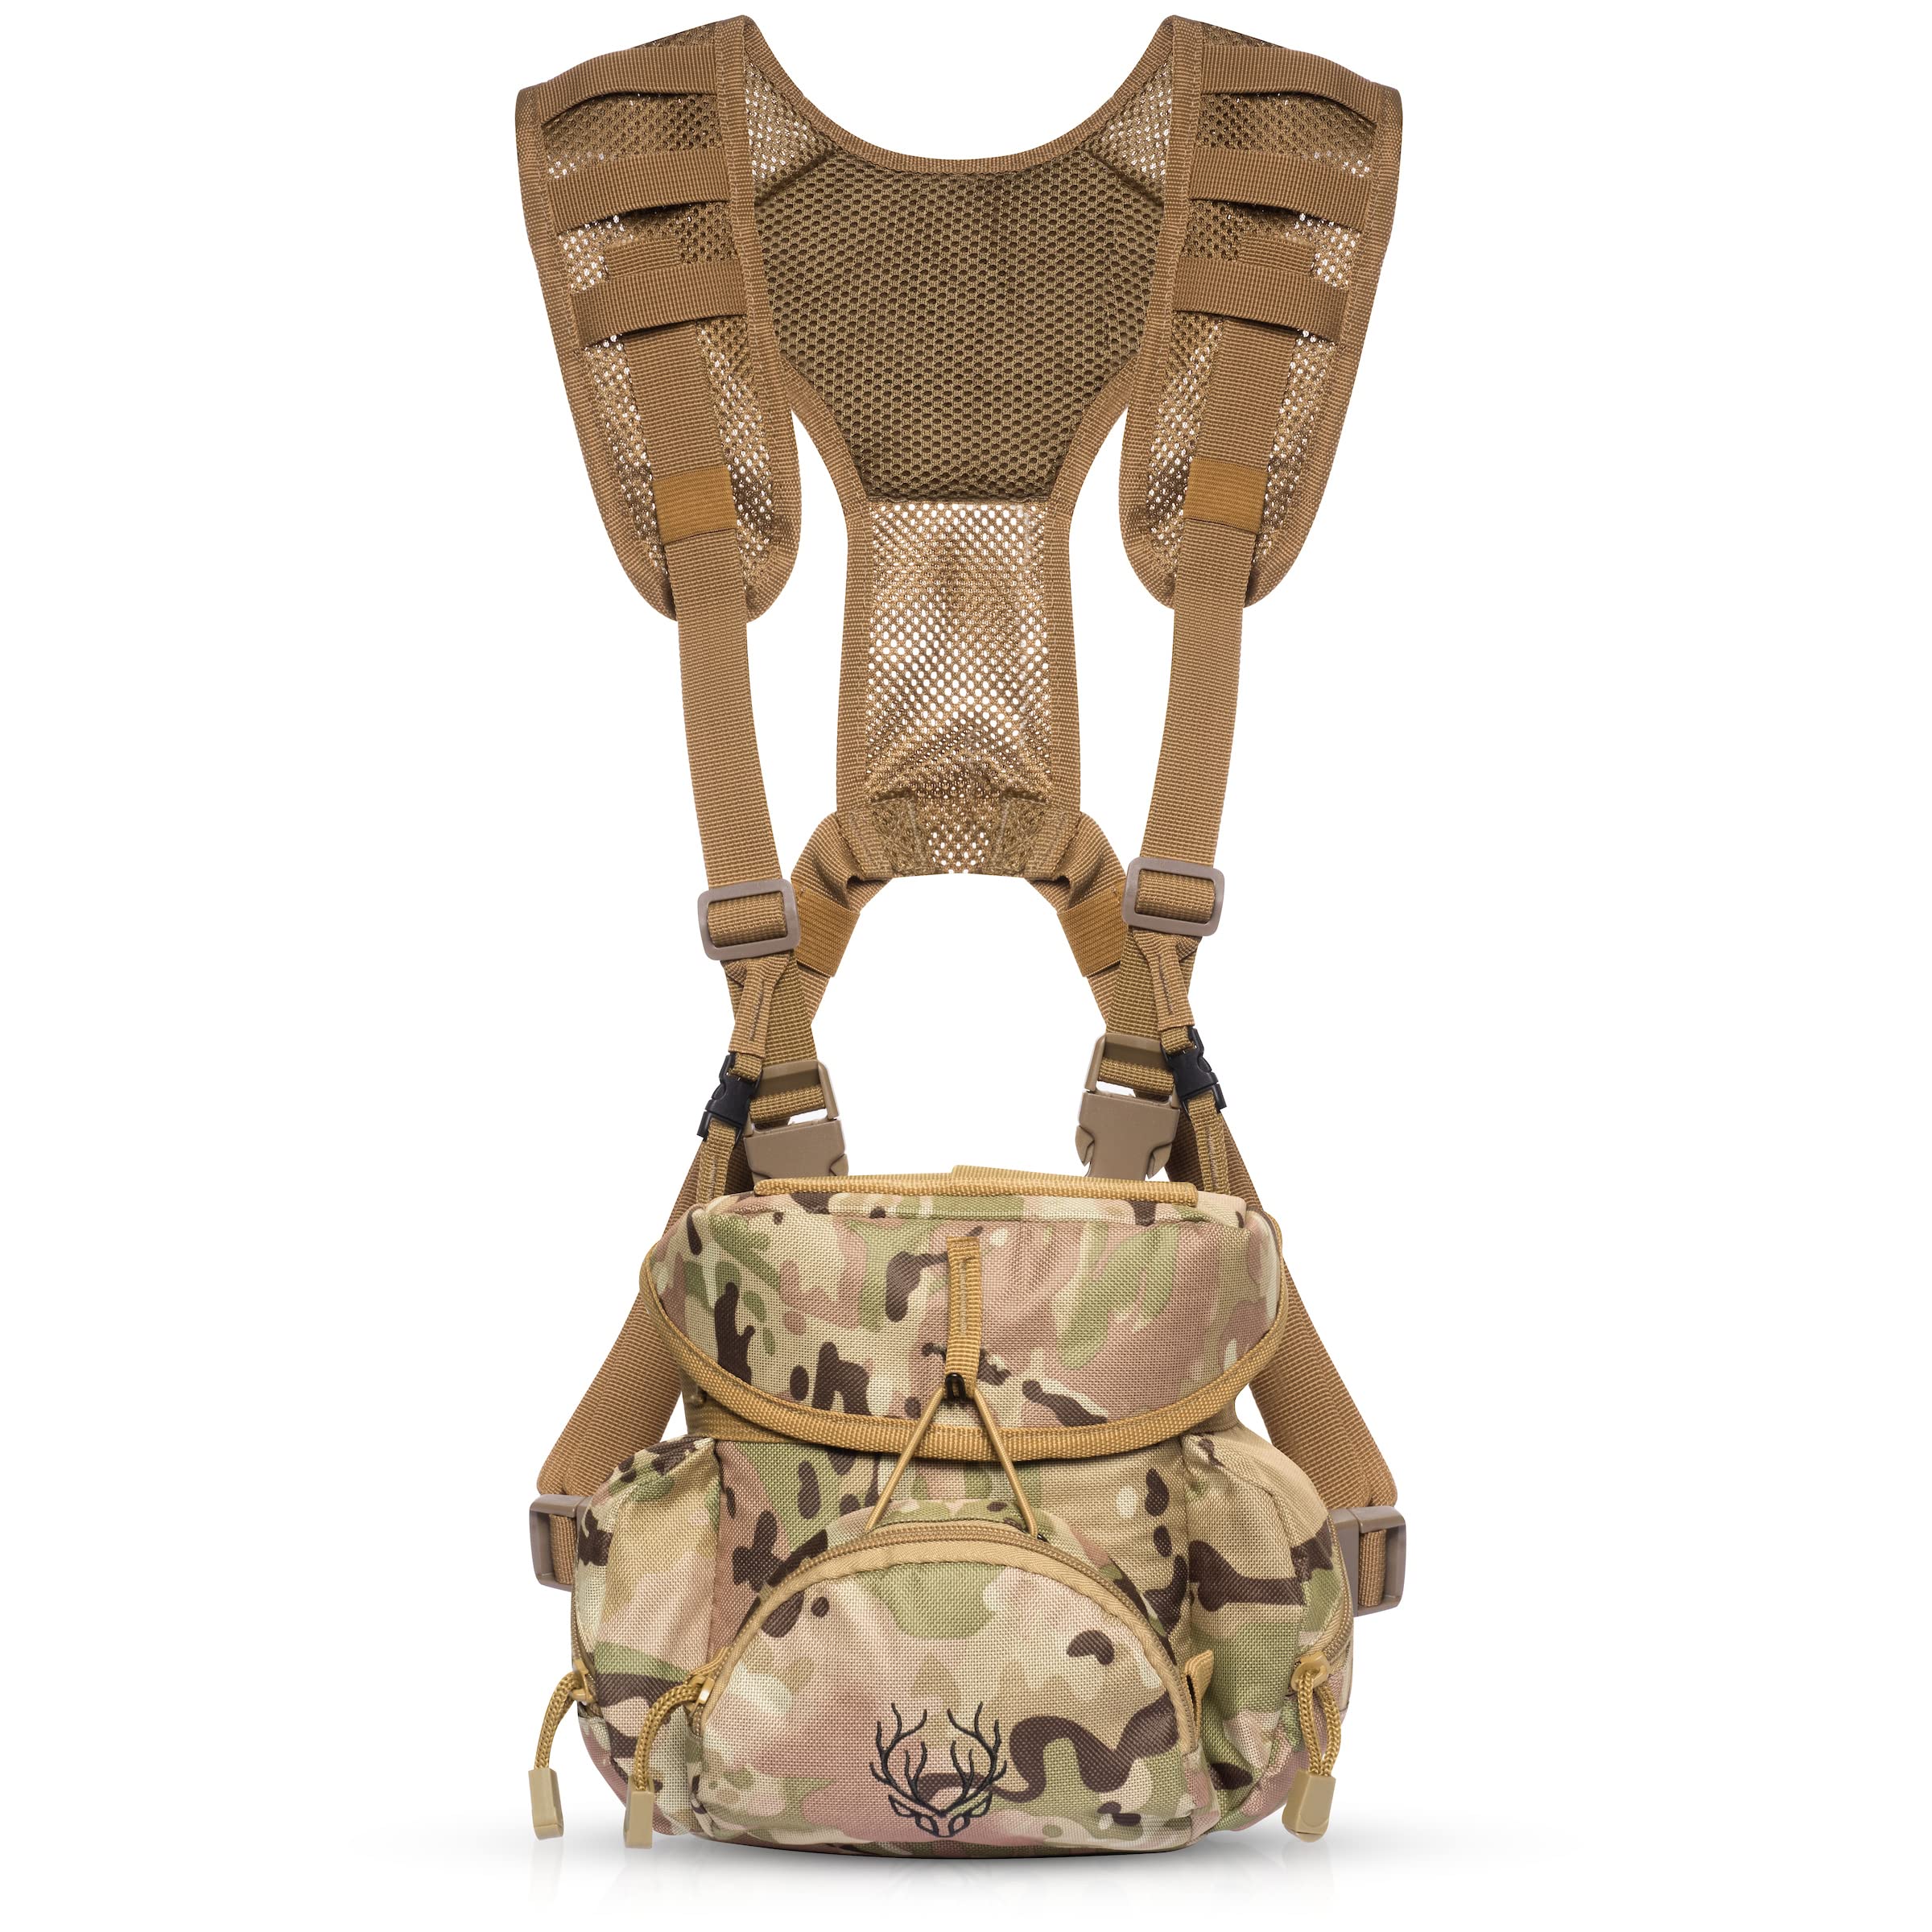 Boundless Performance Binocular Harness Chest Pack - Our Bino Harness case  is Great for Hunting Hiking and Shooting - Bino Straps Secure Your  Binoculars-Holds rangefinders Bullets Gear - Multicam